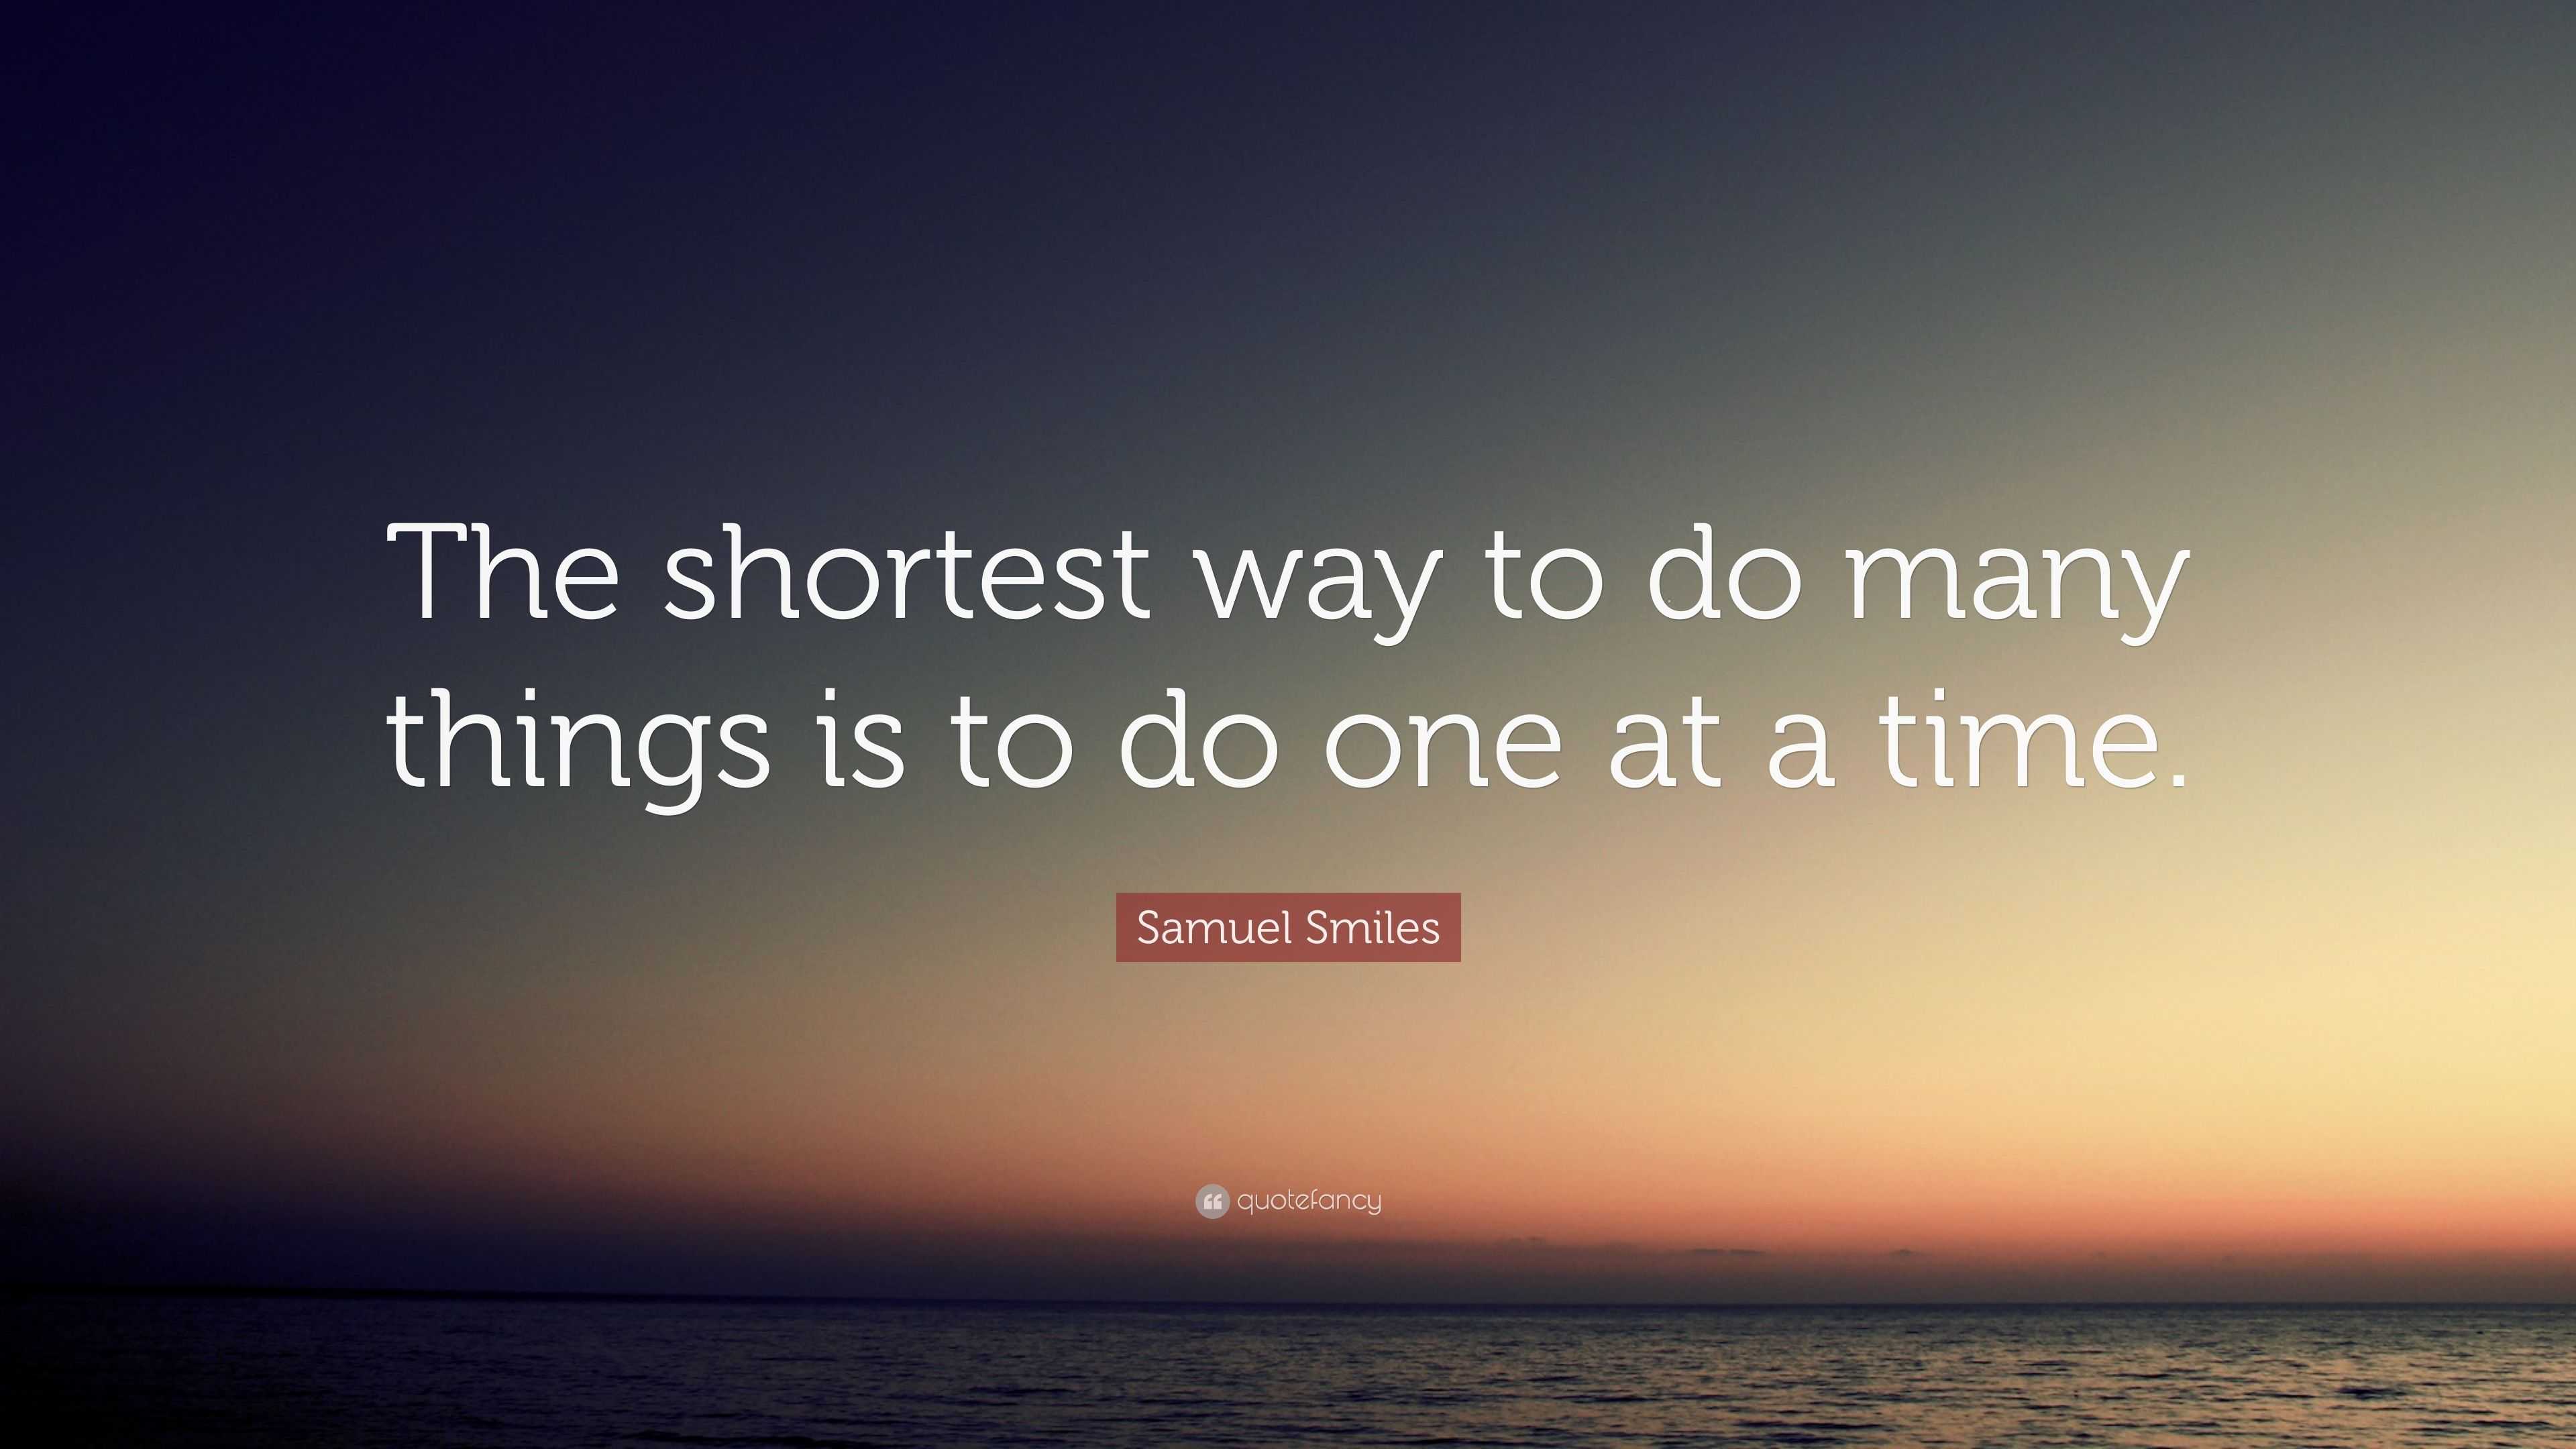 Samuel Smiles Quote: “The shortest way to do many things is to do one ...